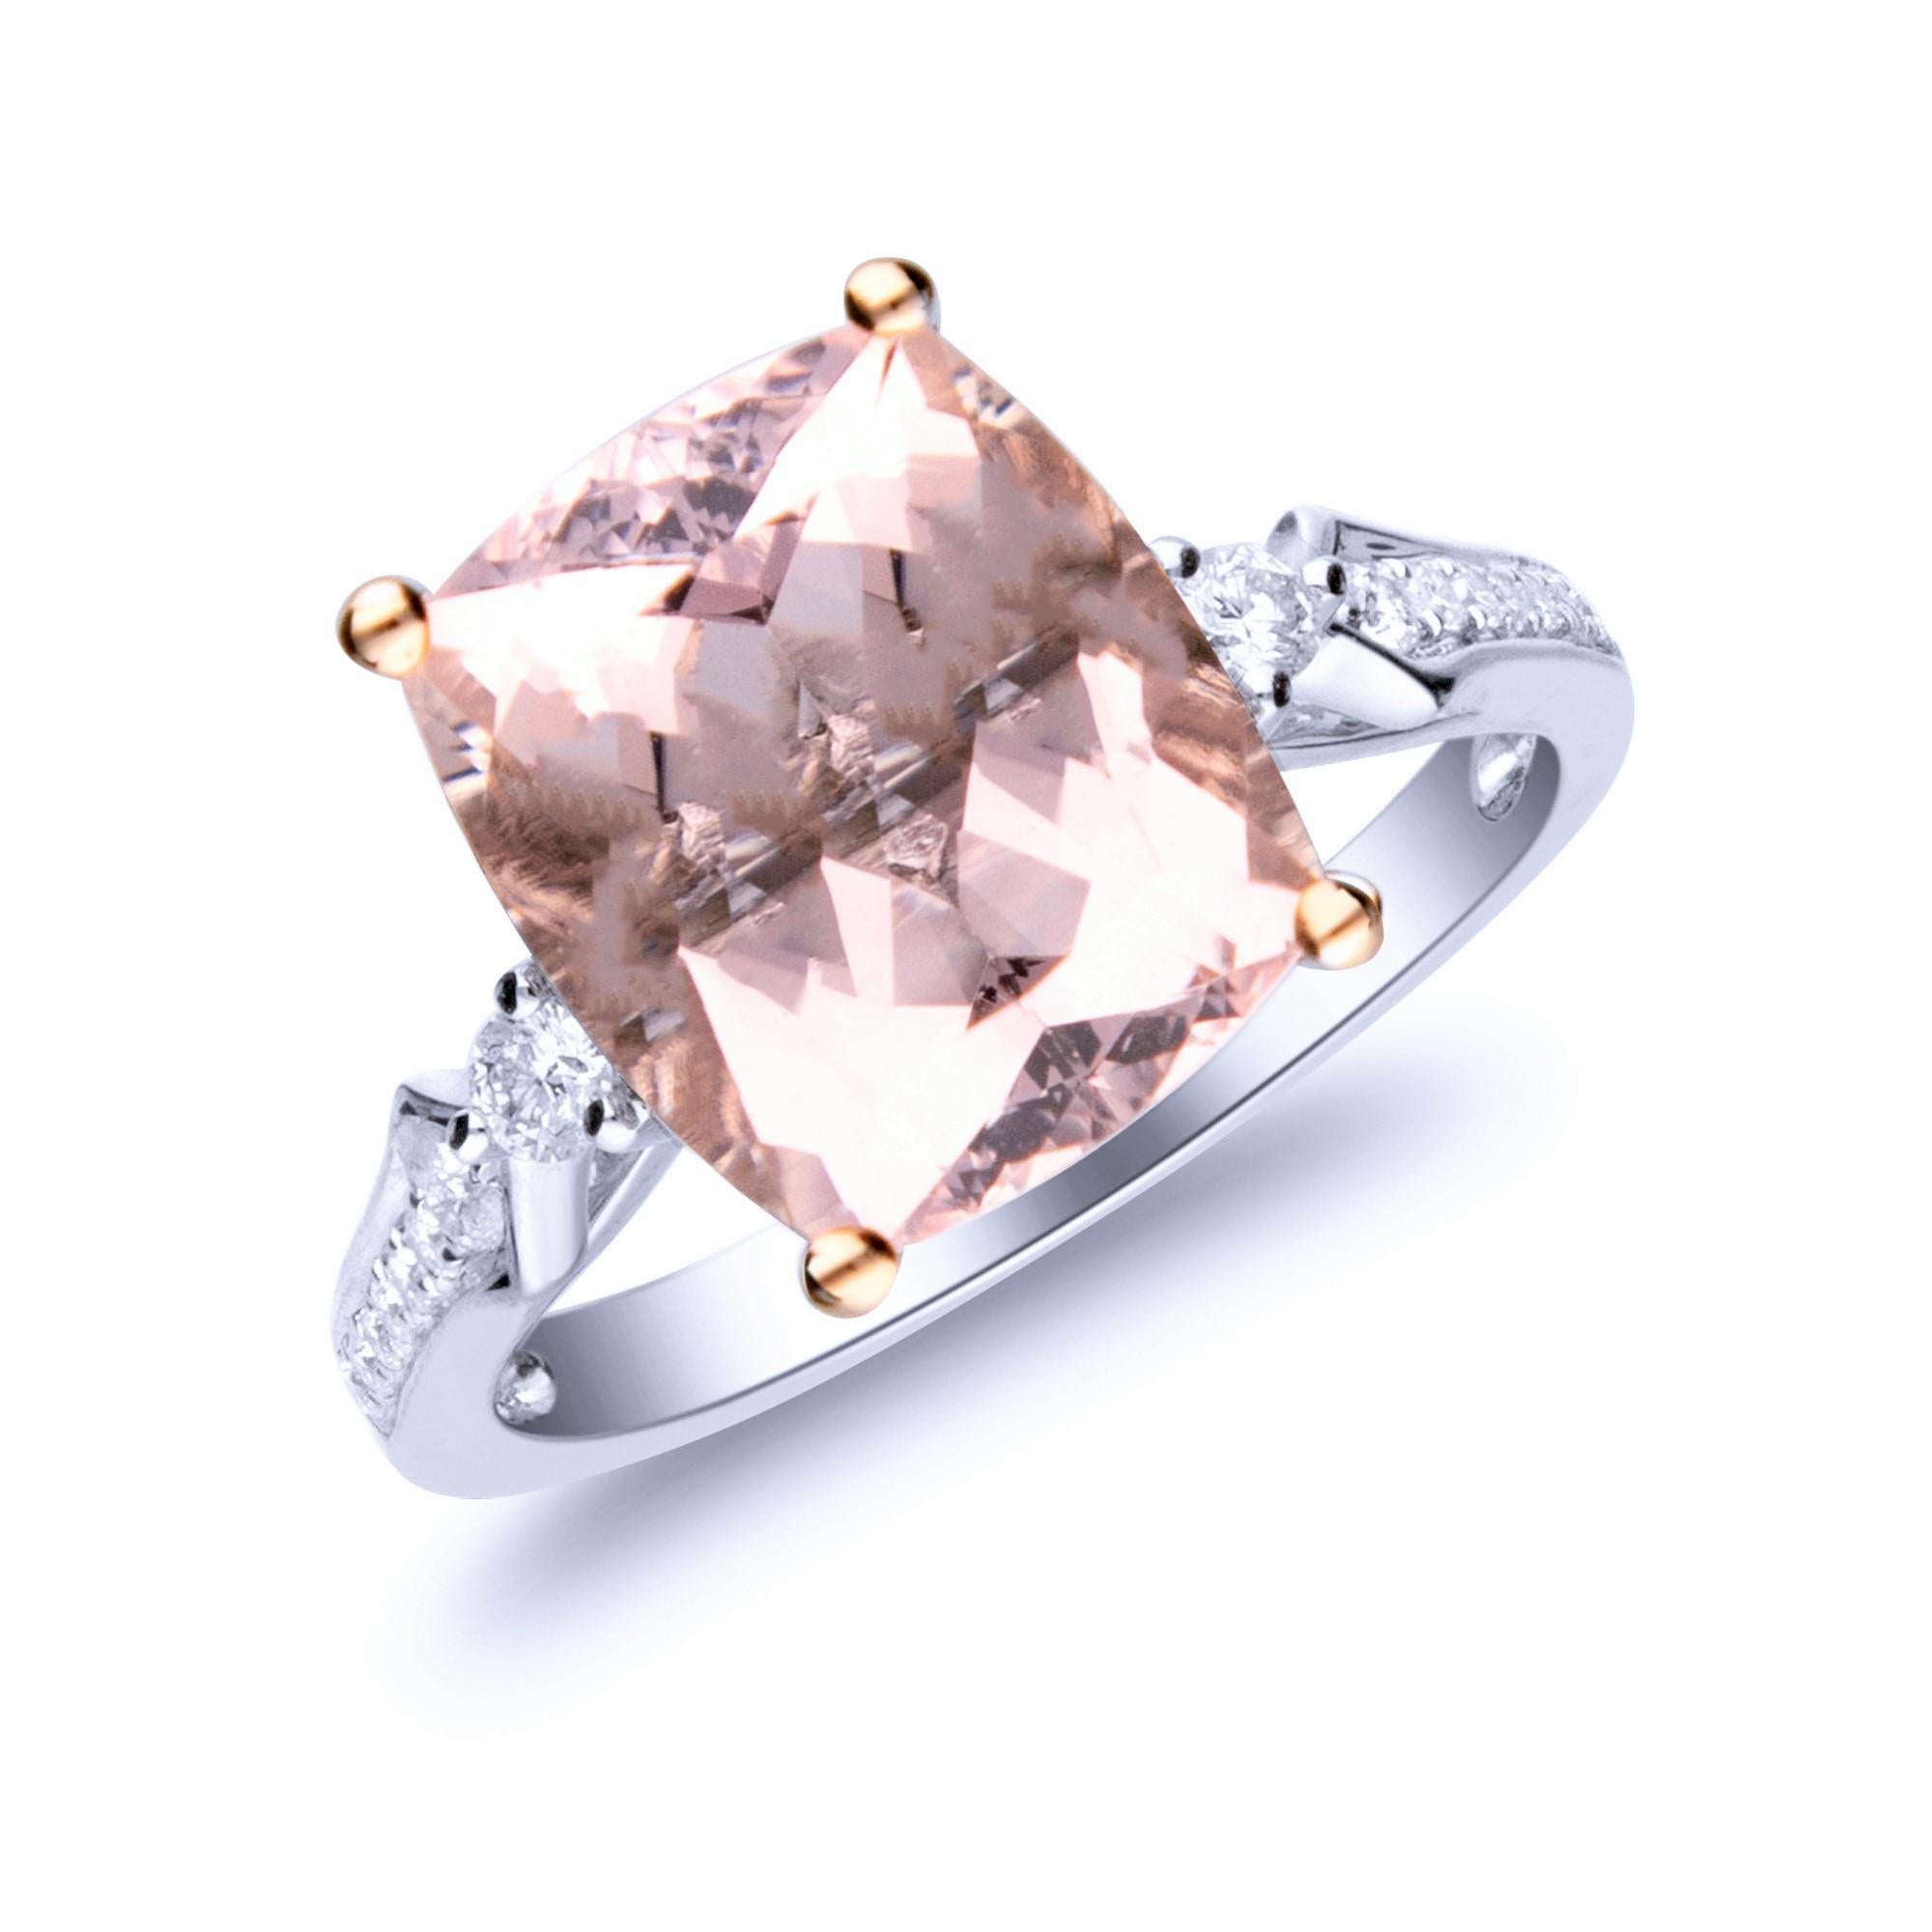 This beautiful Genuine Morganite Ring is crafted in 14-karat White gold and features a 5.61 carat 1 Pc Genuine Morganite and 18 Pcs Round White Diamonds in GH- I1 quality with 0.22 Ct in a prong-setting. This Ring comes in sizes 6 to 9, and it is a